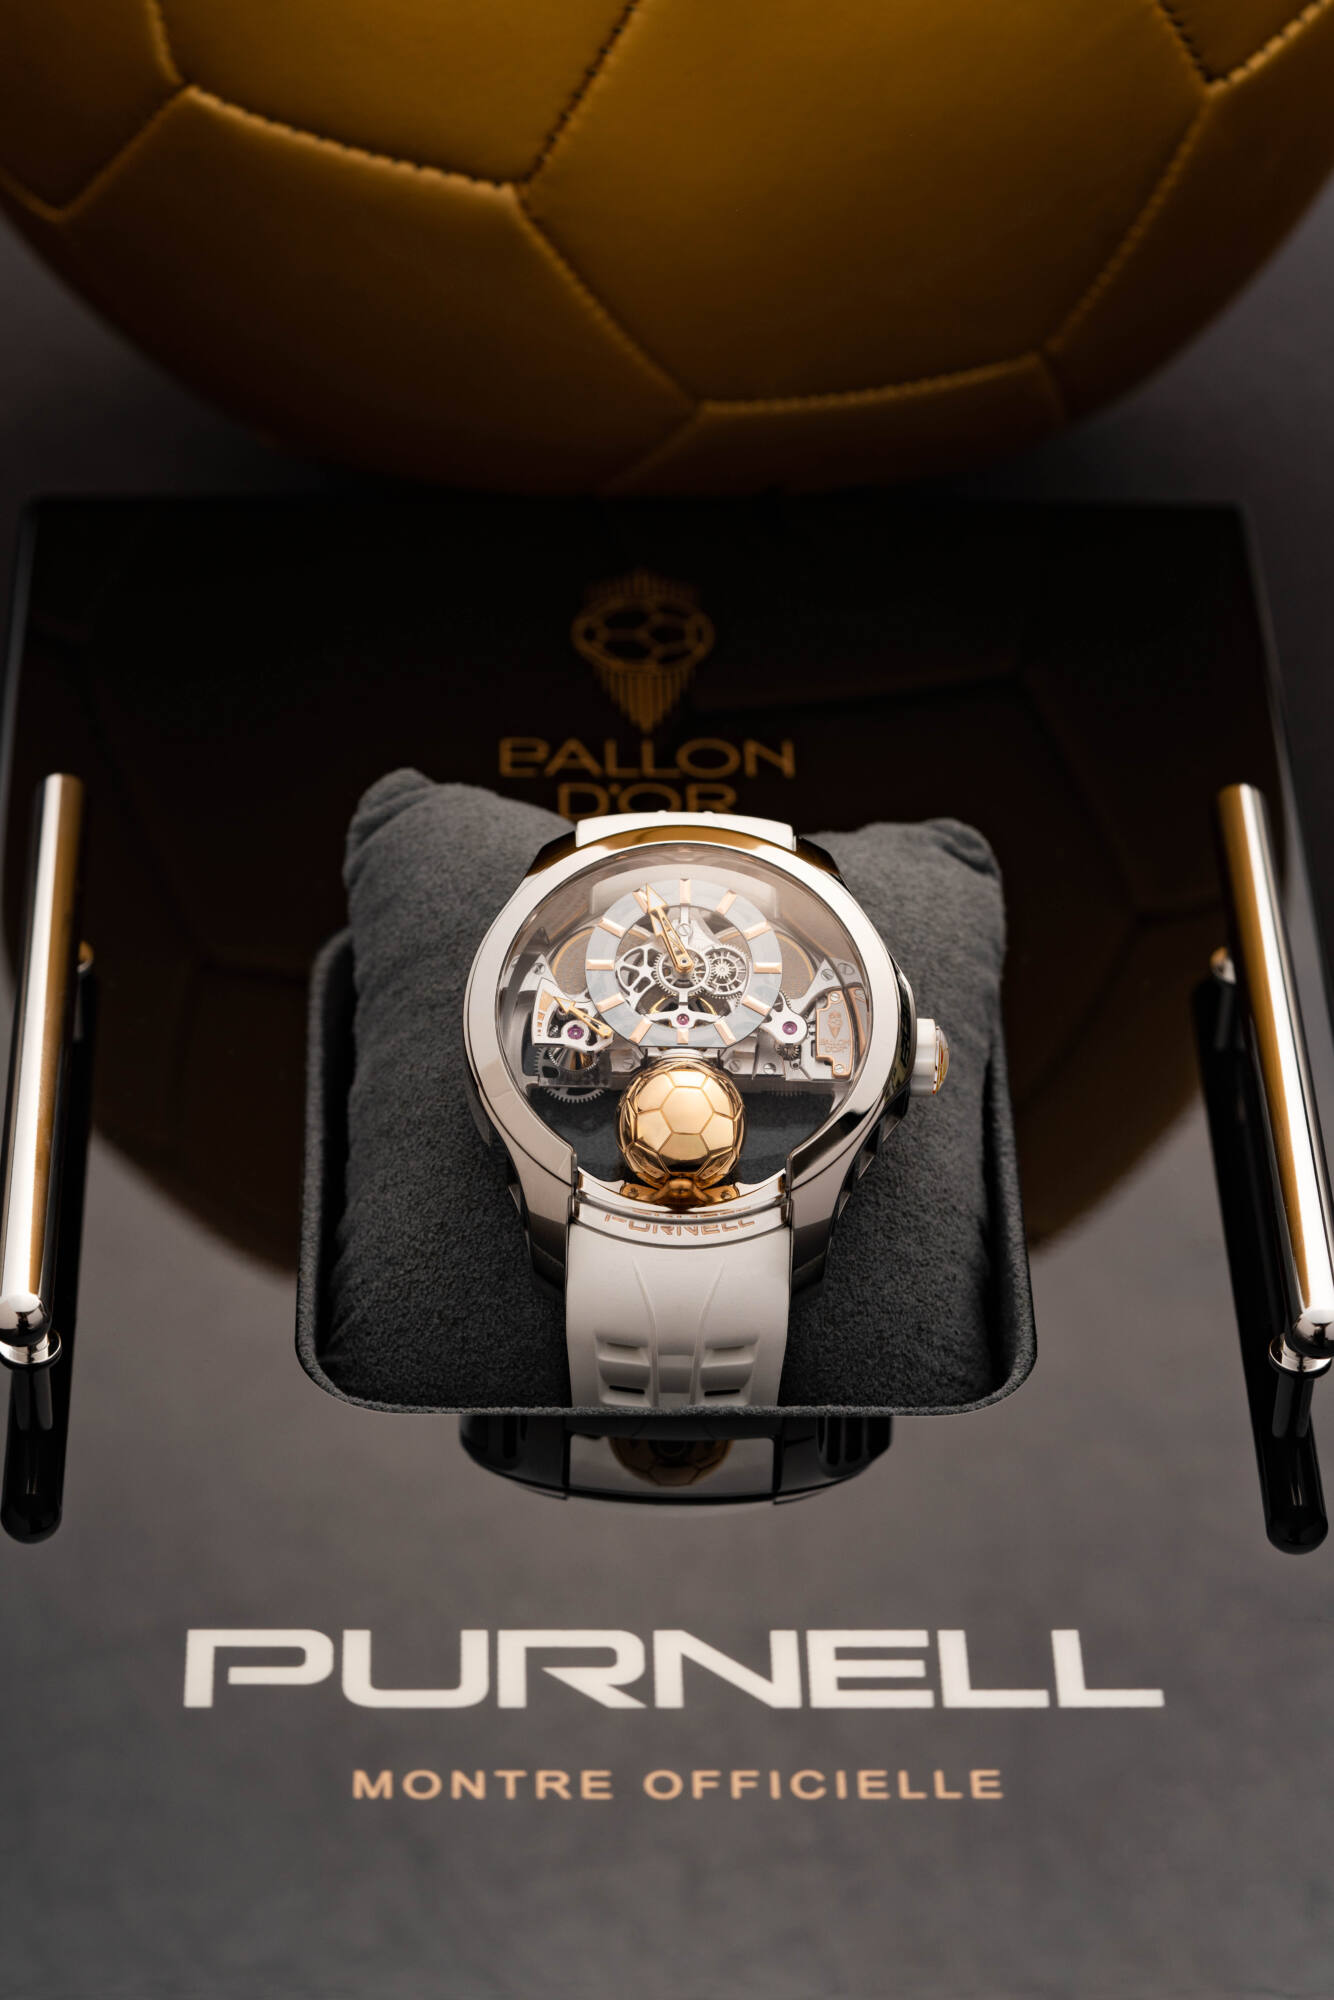 Purnell is Official Partner of the Ballon d’Or and Giorgia Mondani will attend the event - MondaniWeb